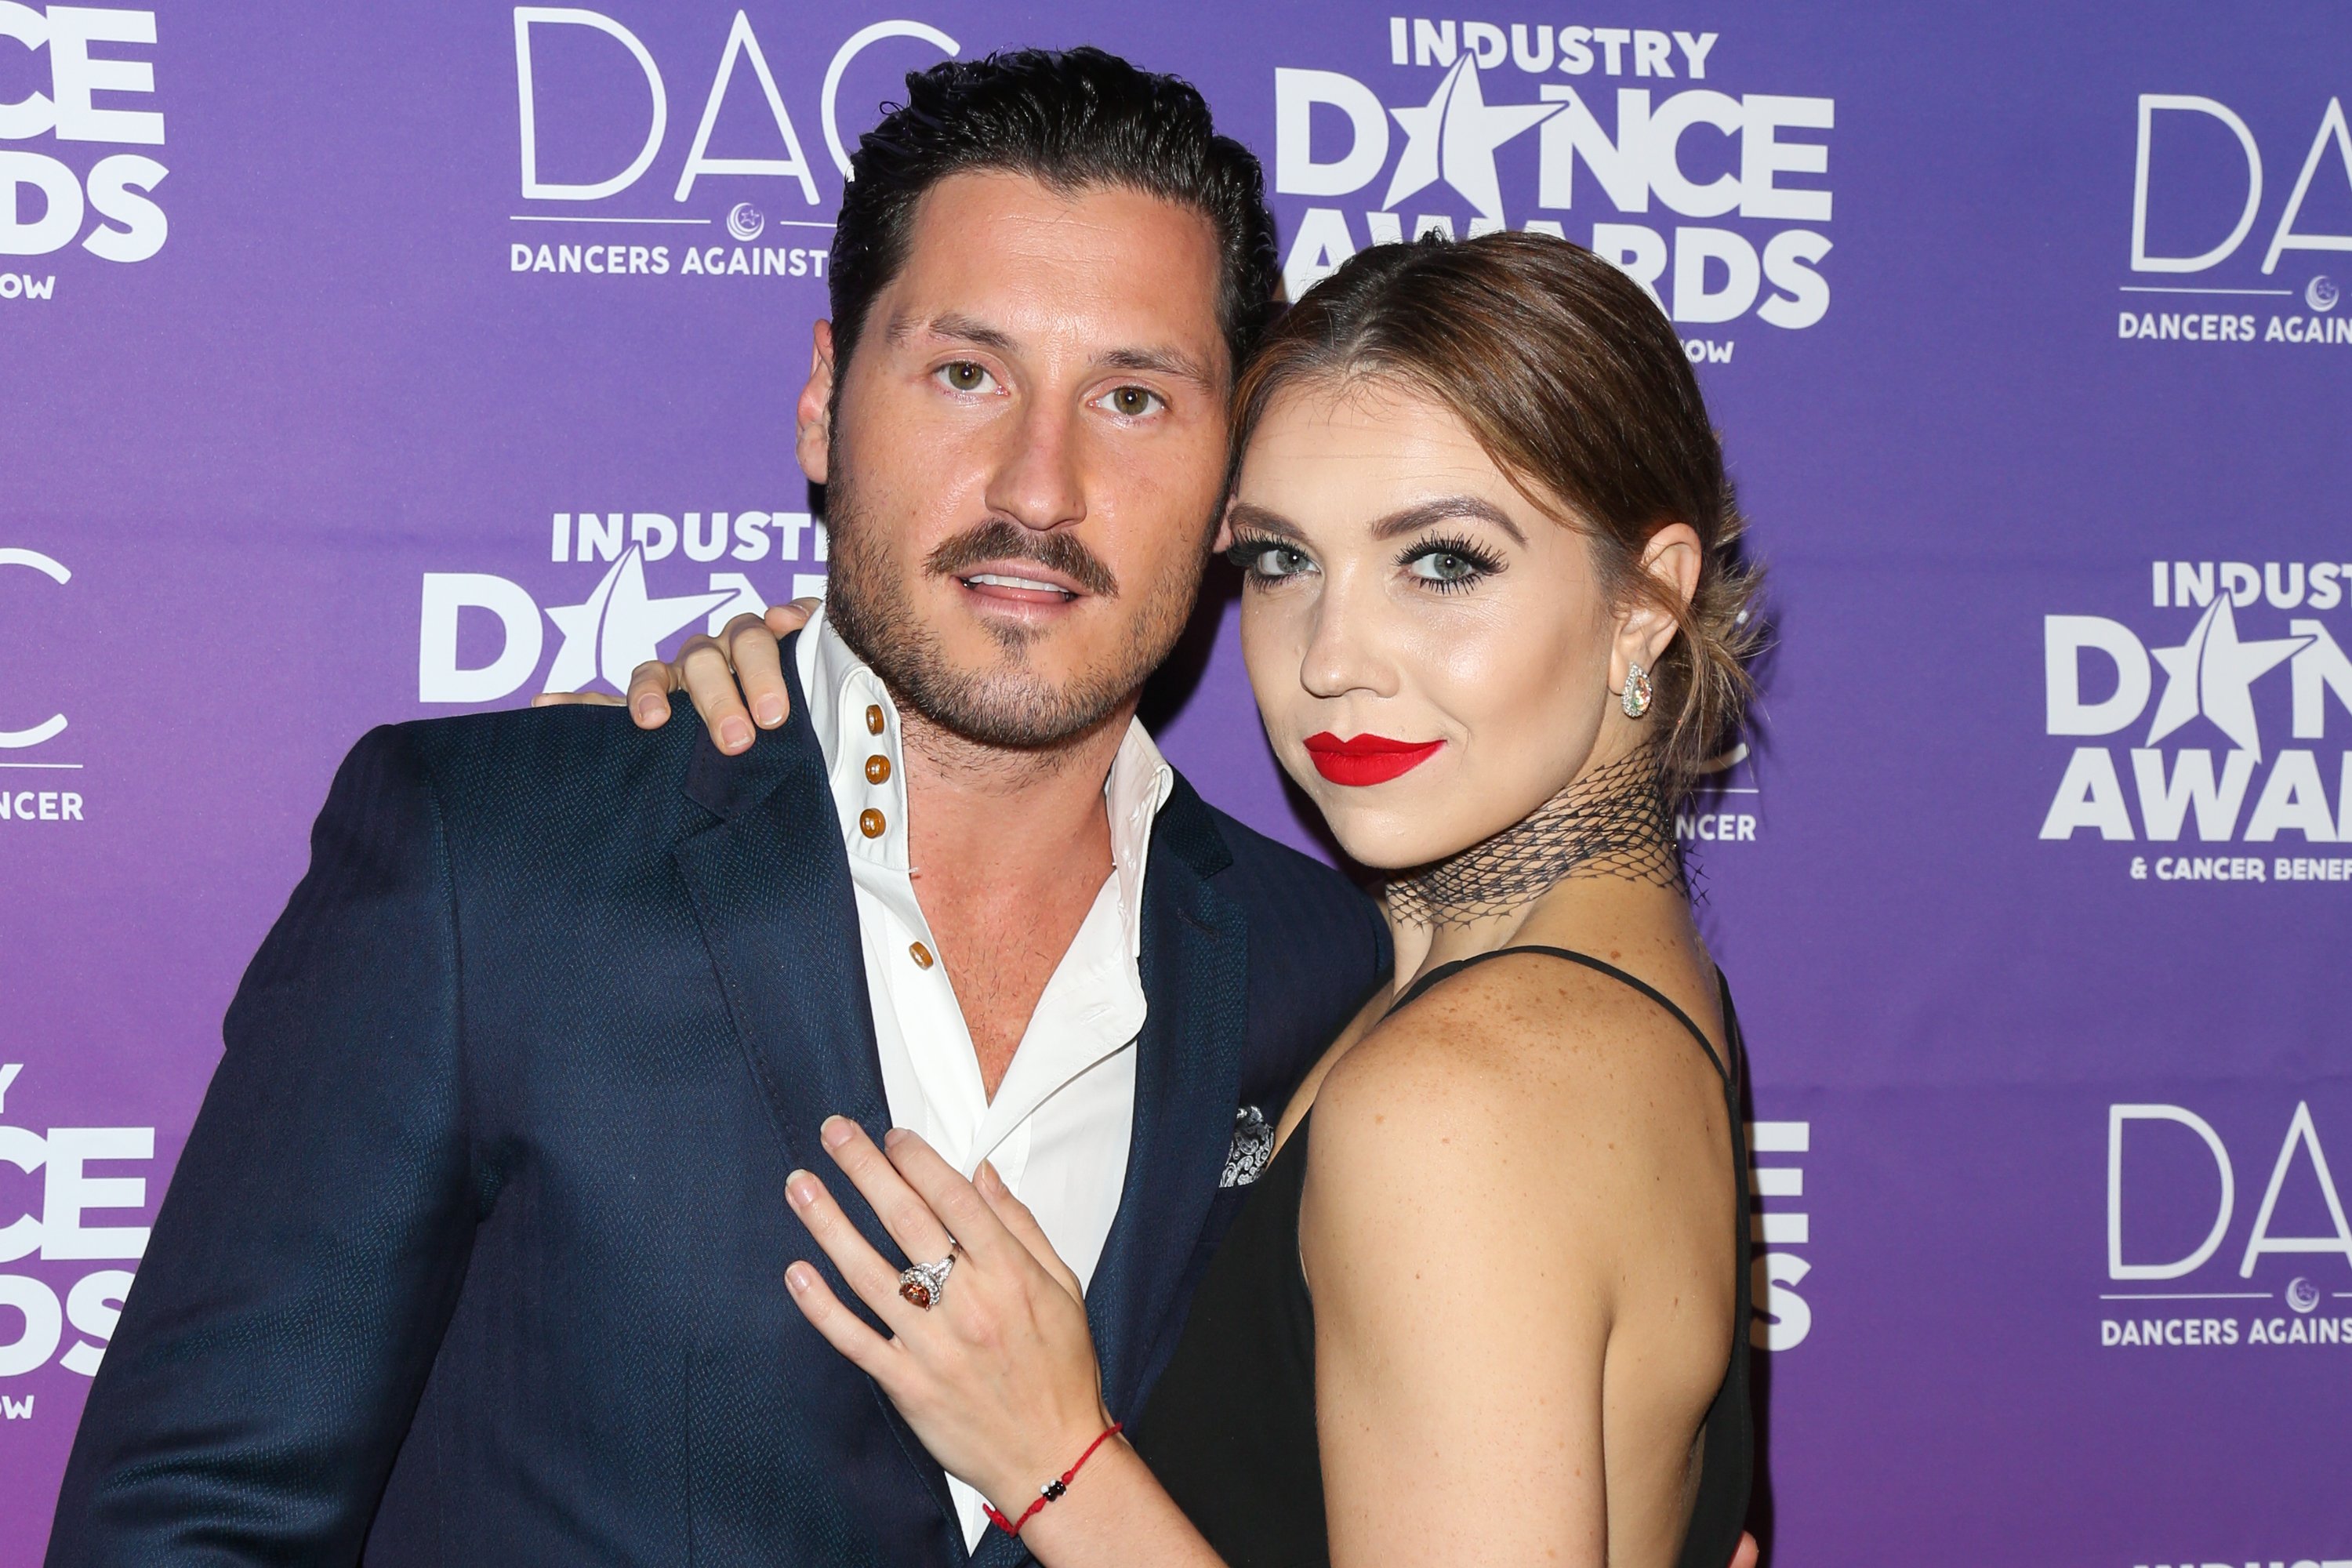 Professional Dancers Val Chmerkovskiy and Jenna Johnson attend the 2017 Industry Dance Awards and Cancer Benefit show at Avalon on August 16, 2017 in Hollywood, California | Source: Getty Images